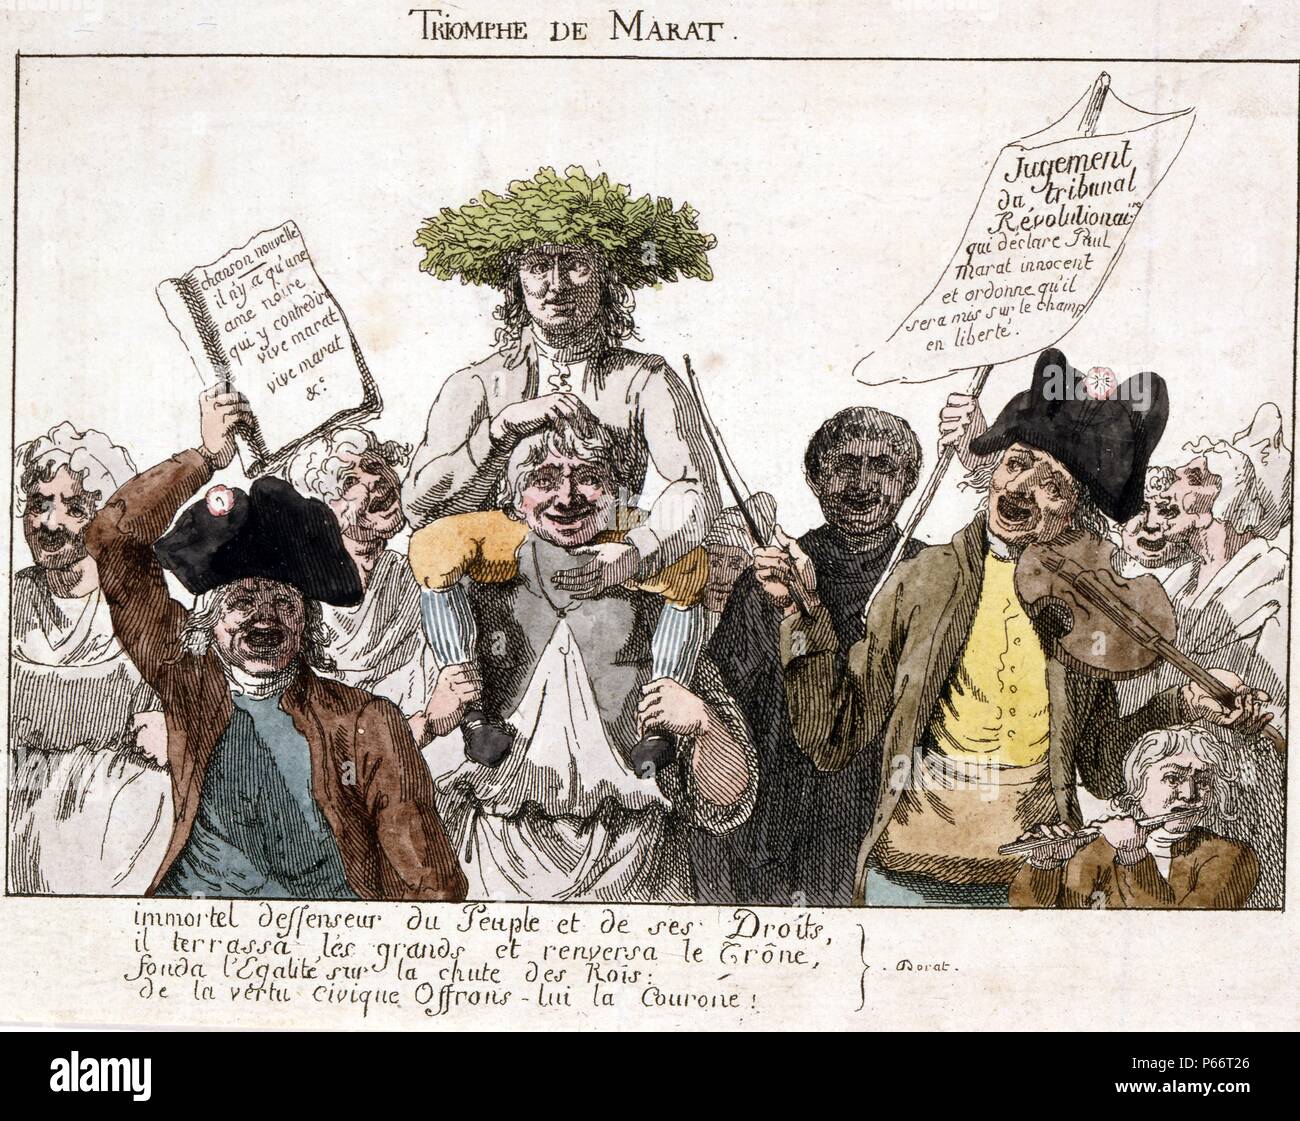 Triomphe de Marat : [1793] etching, with watercolour. Jean Paul Marat with crown of laurel leaves carried on shoulders of man around whom others are crowded; celebrating his acquittal by Revolutionary Tribunal. French political cartoon Stock Photo